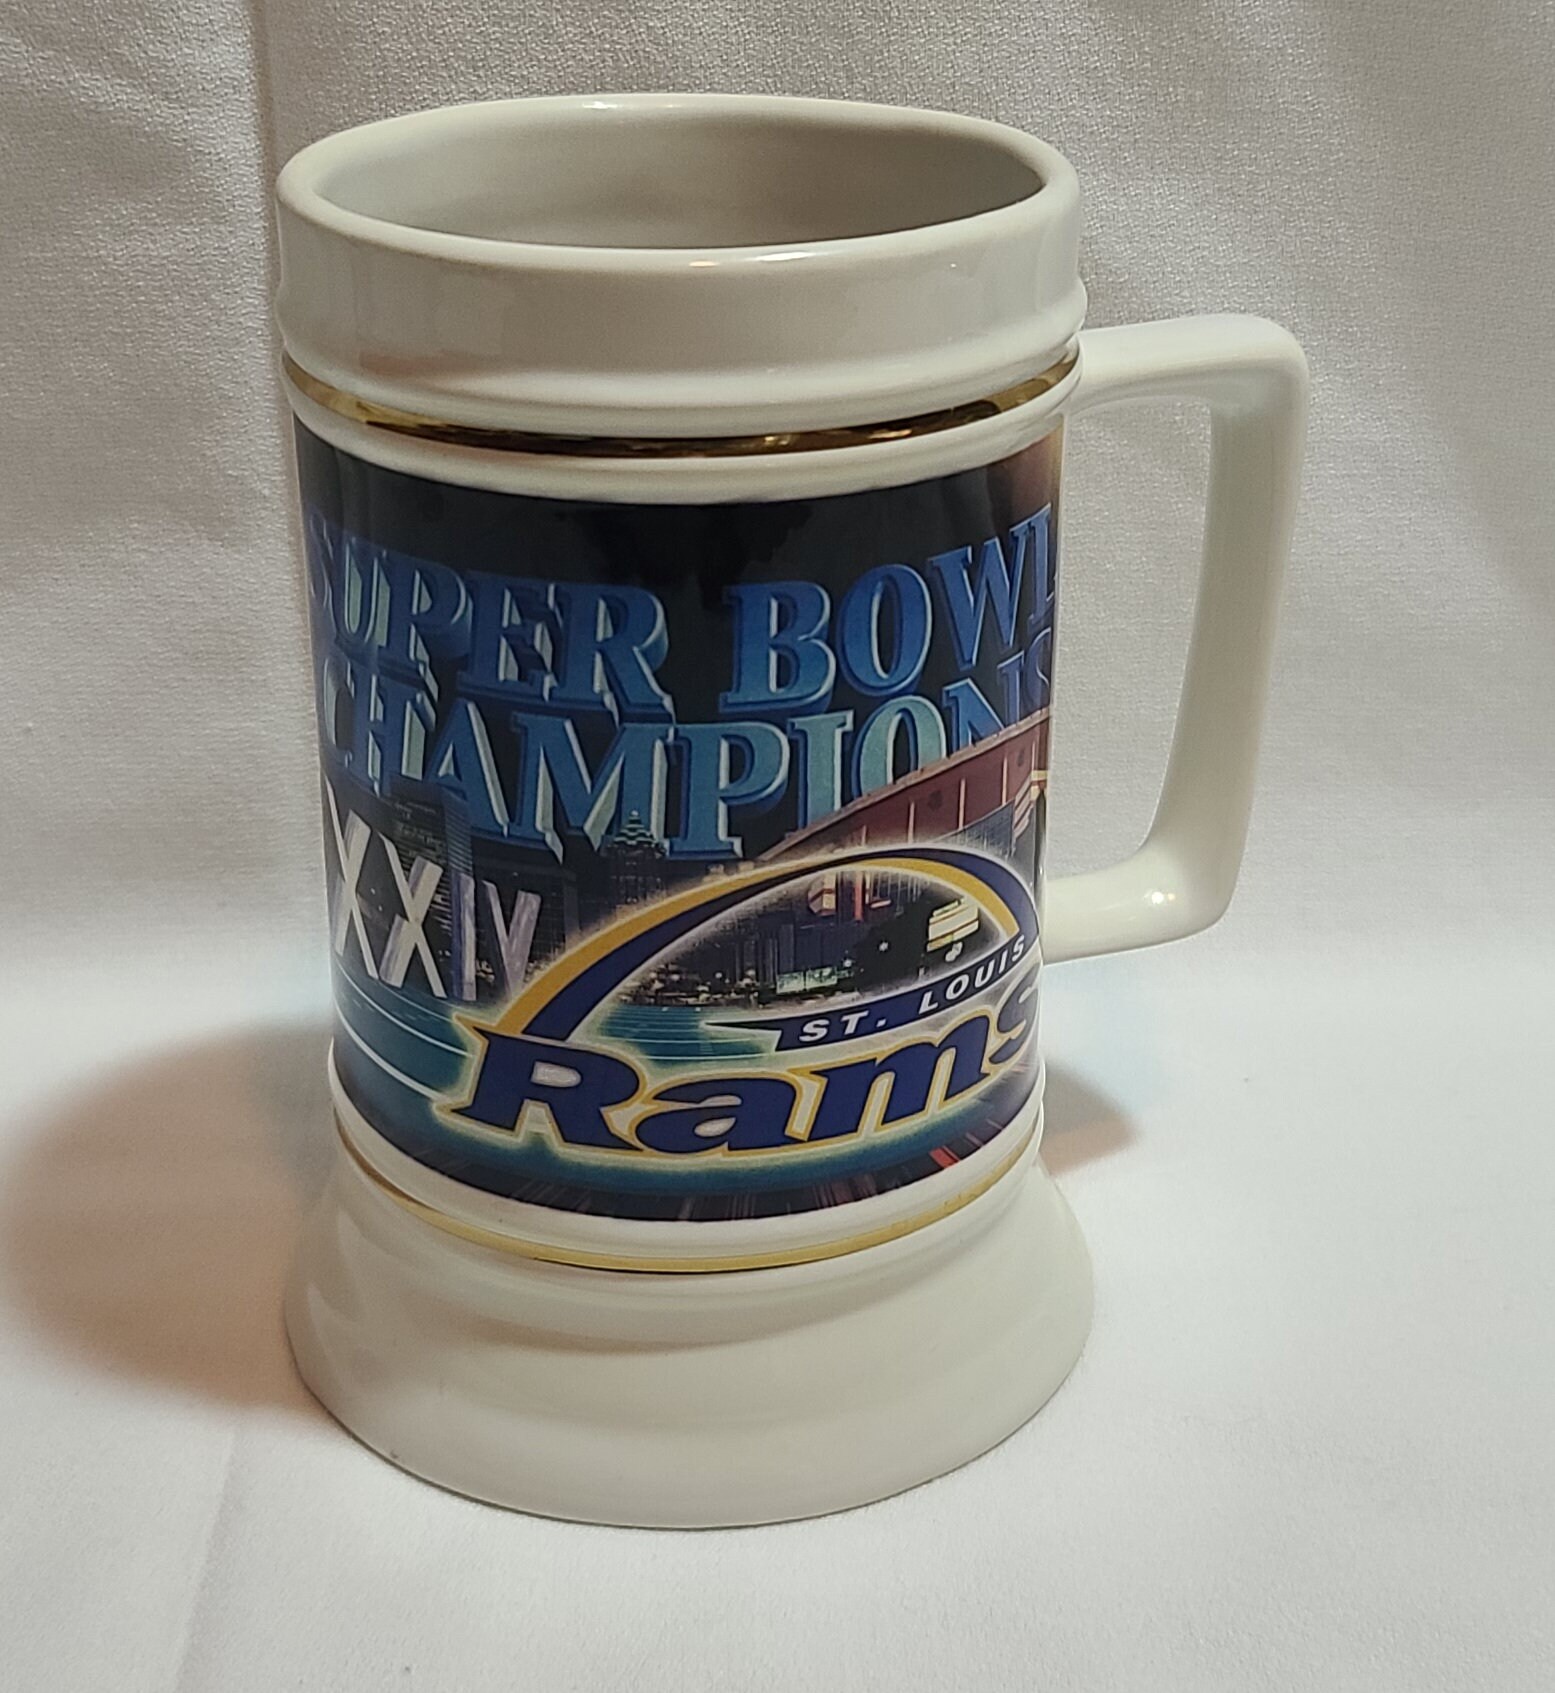 2 different Nfl sublimated coffee mugs LA Rams 15oz.